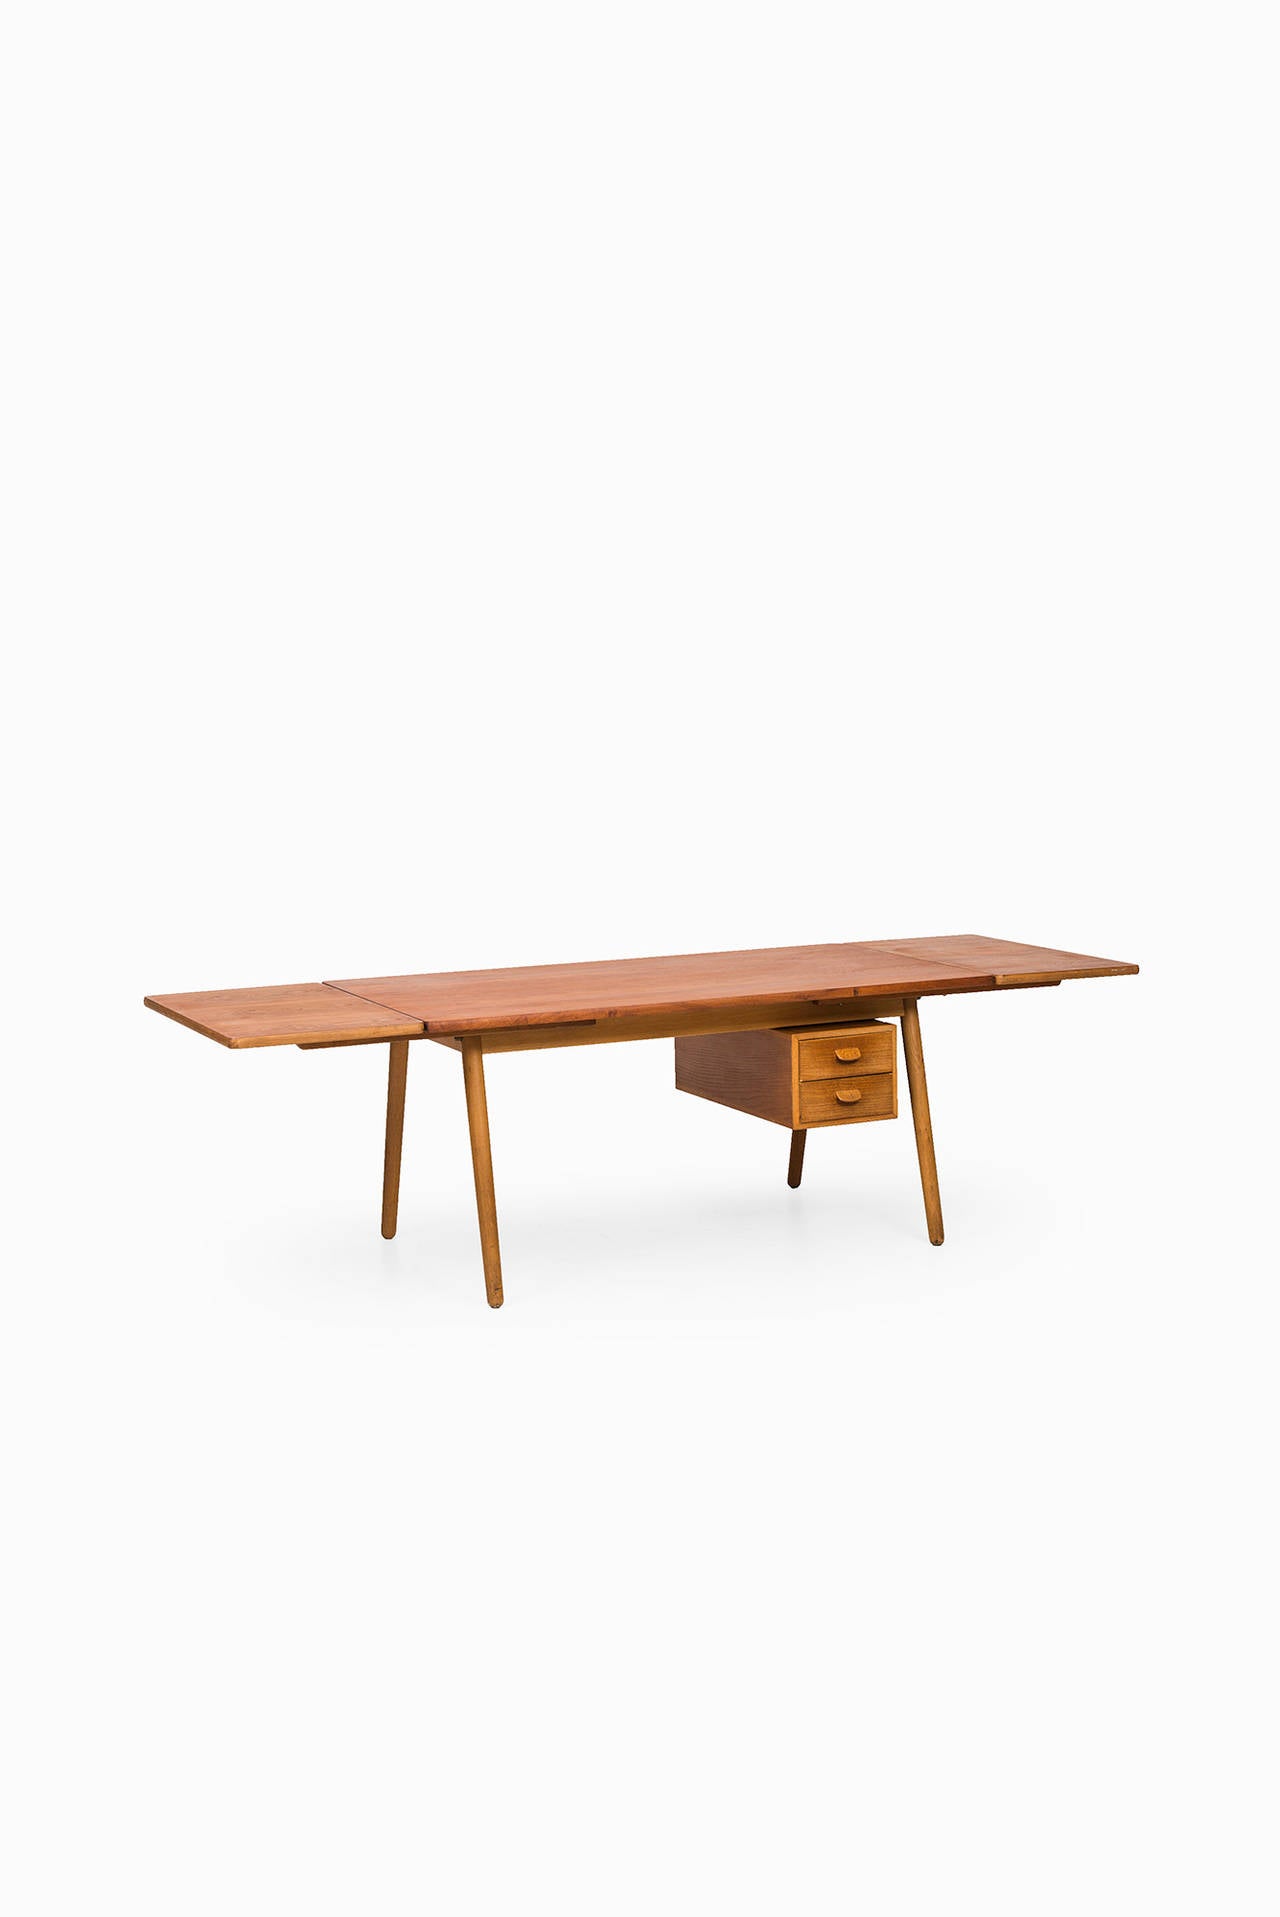 Danish Poul Volther Desk/Dining Table by FDB Møbler in Denmark